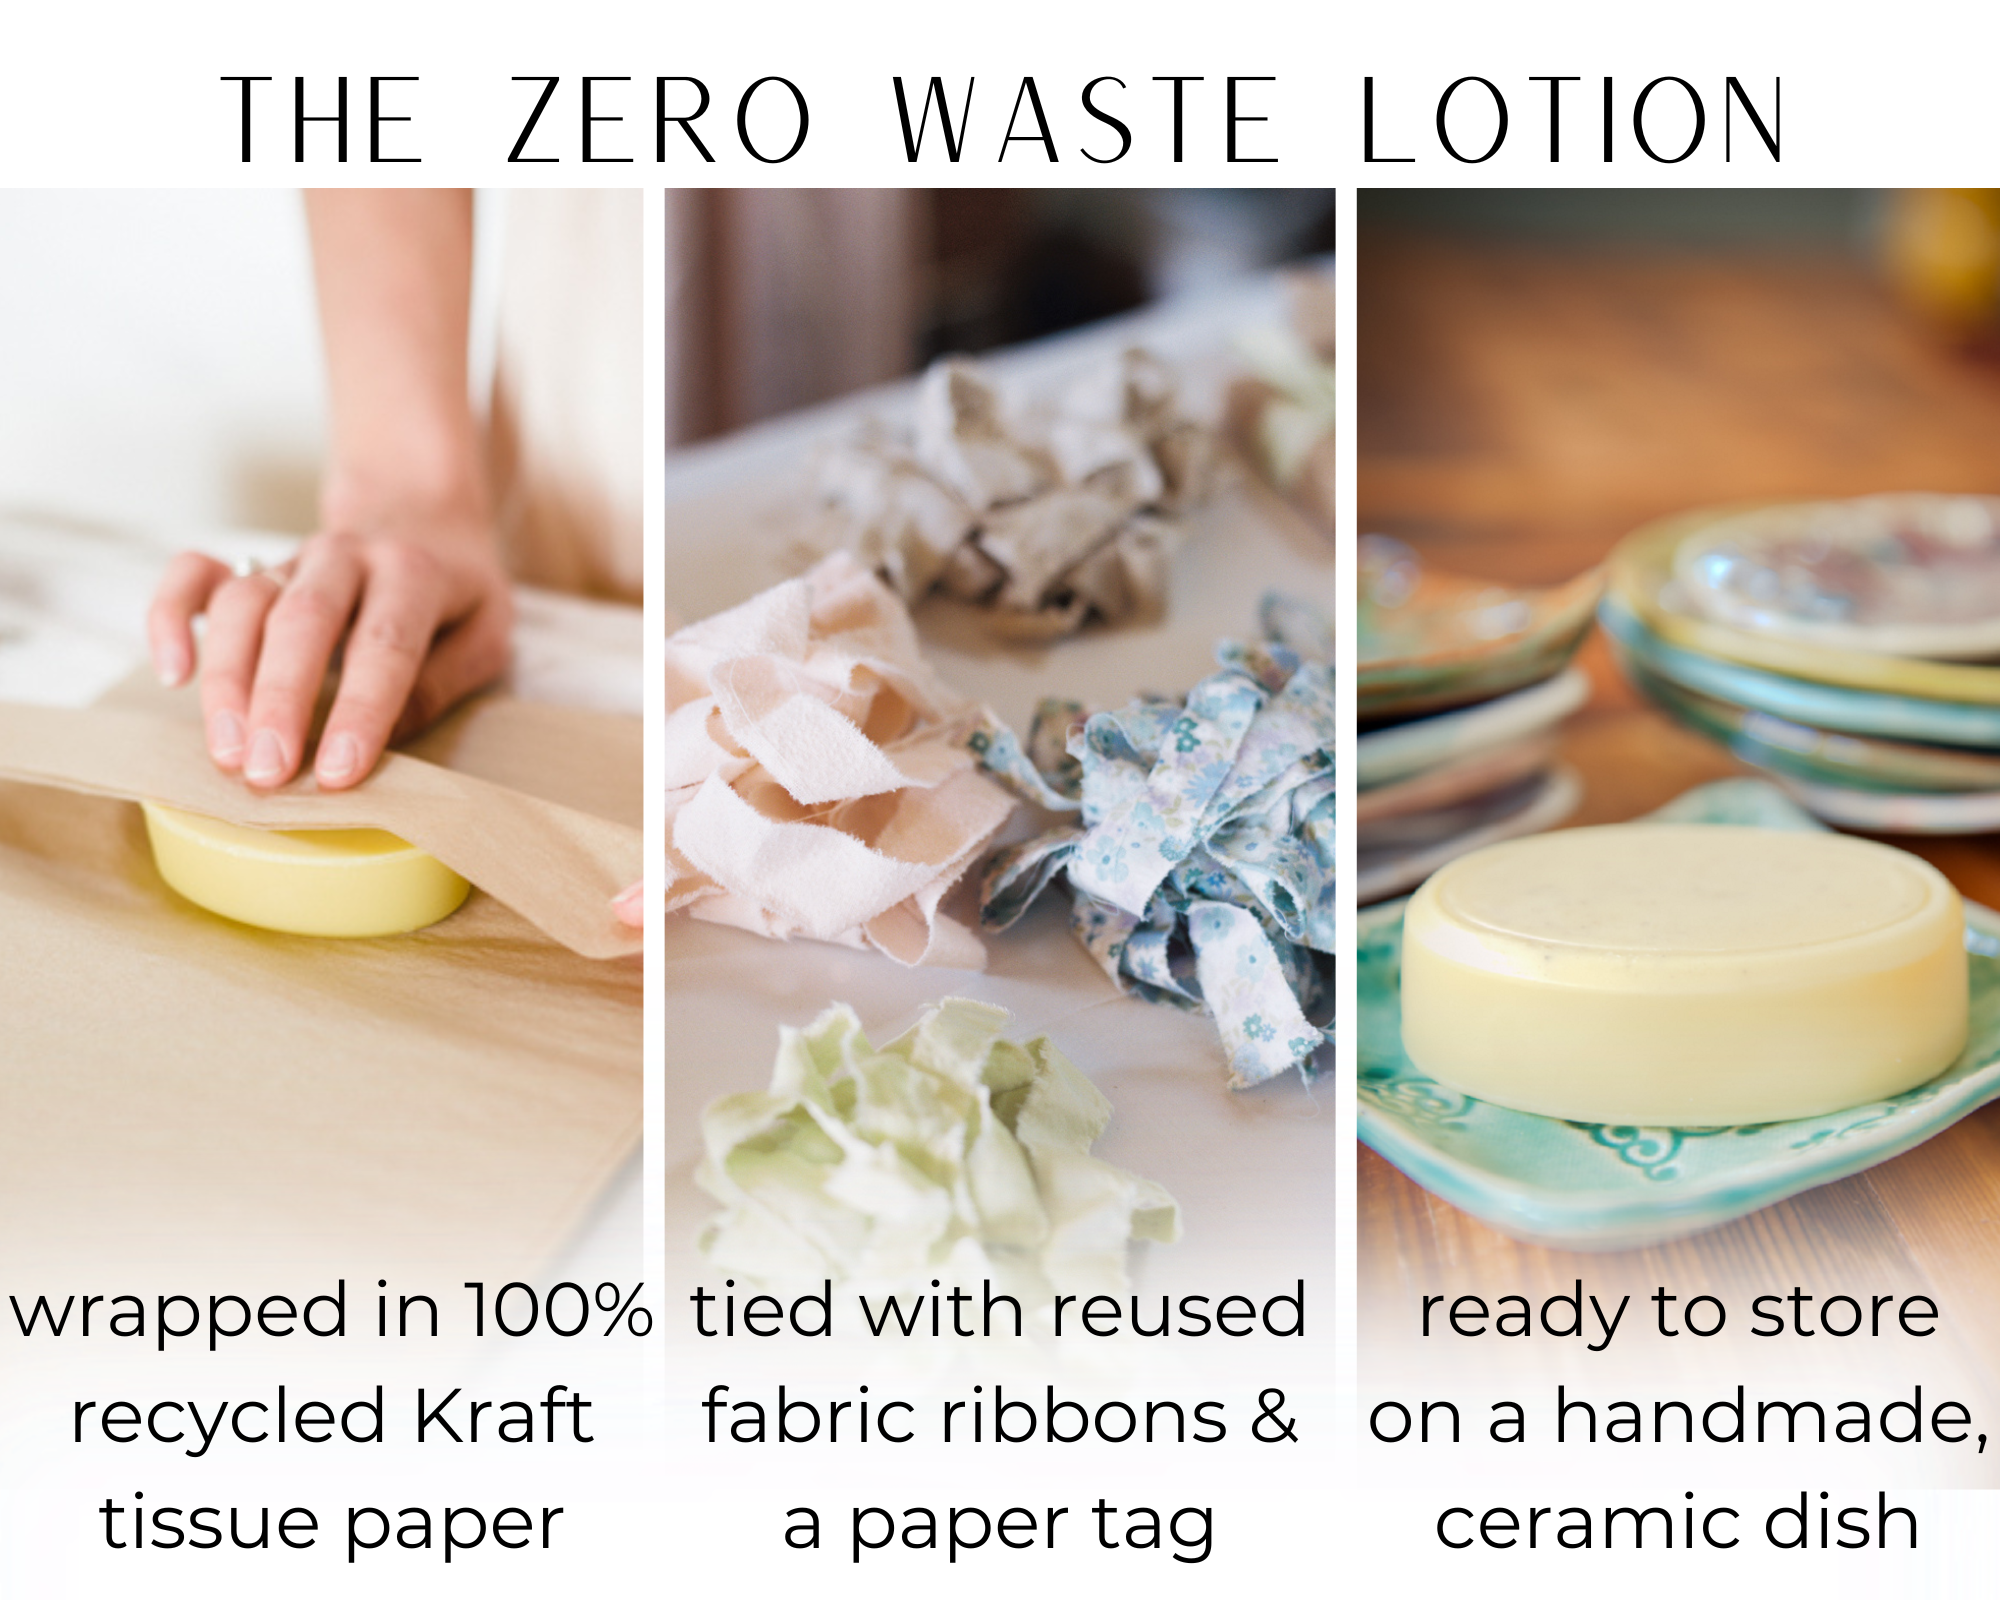 An eco-friendly, zero waste lotion handcrafted in a sustainable manner to eliminate waste and deeply nourish any dry skin. Click image for more information.